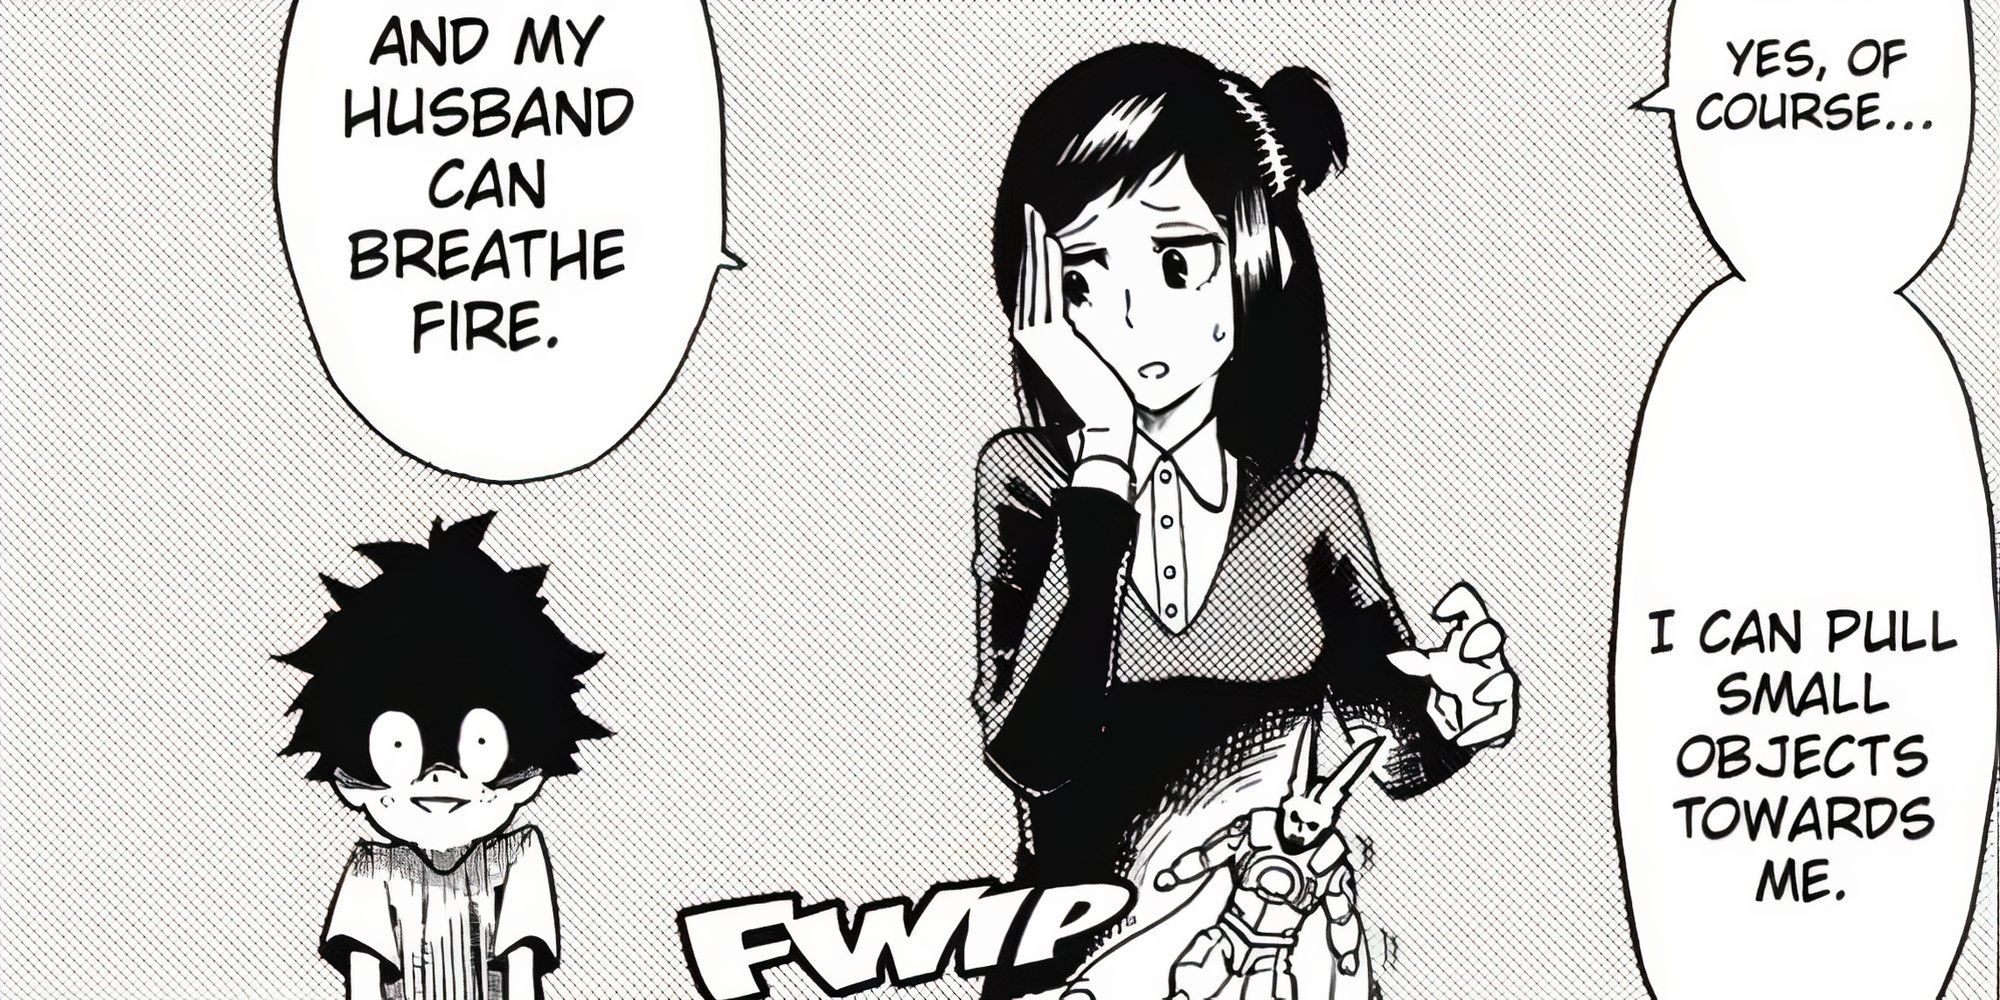 young inko with a young deku at the doctor's office in chapter 1 of y hero academia describing her and her husband's quirks